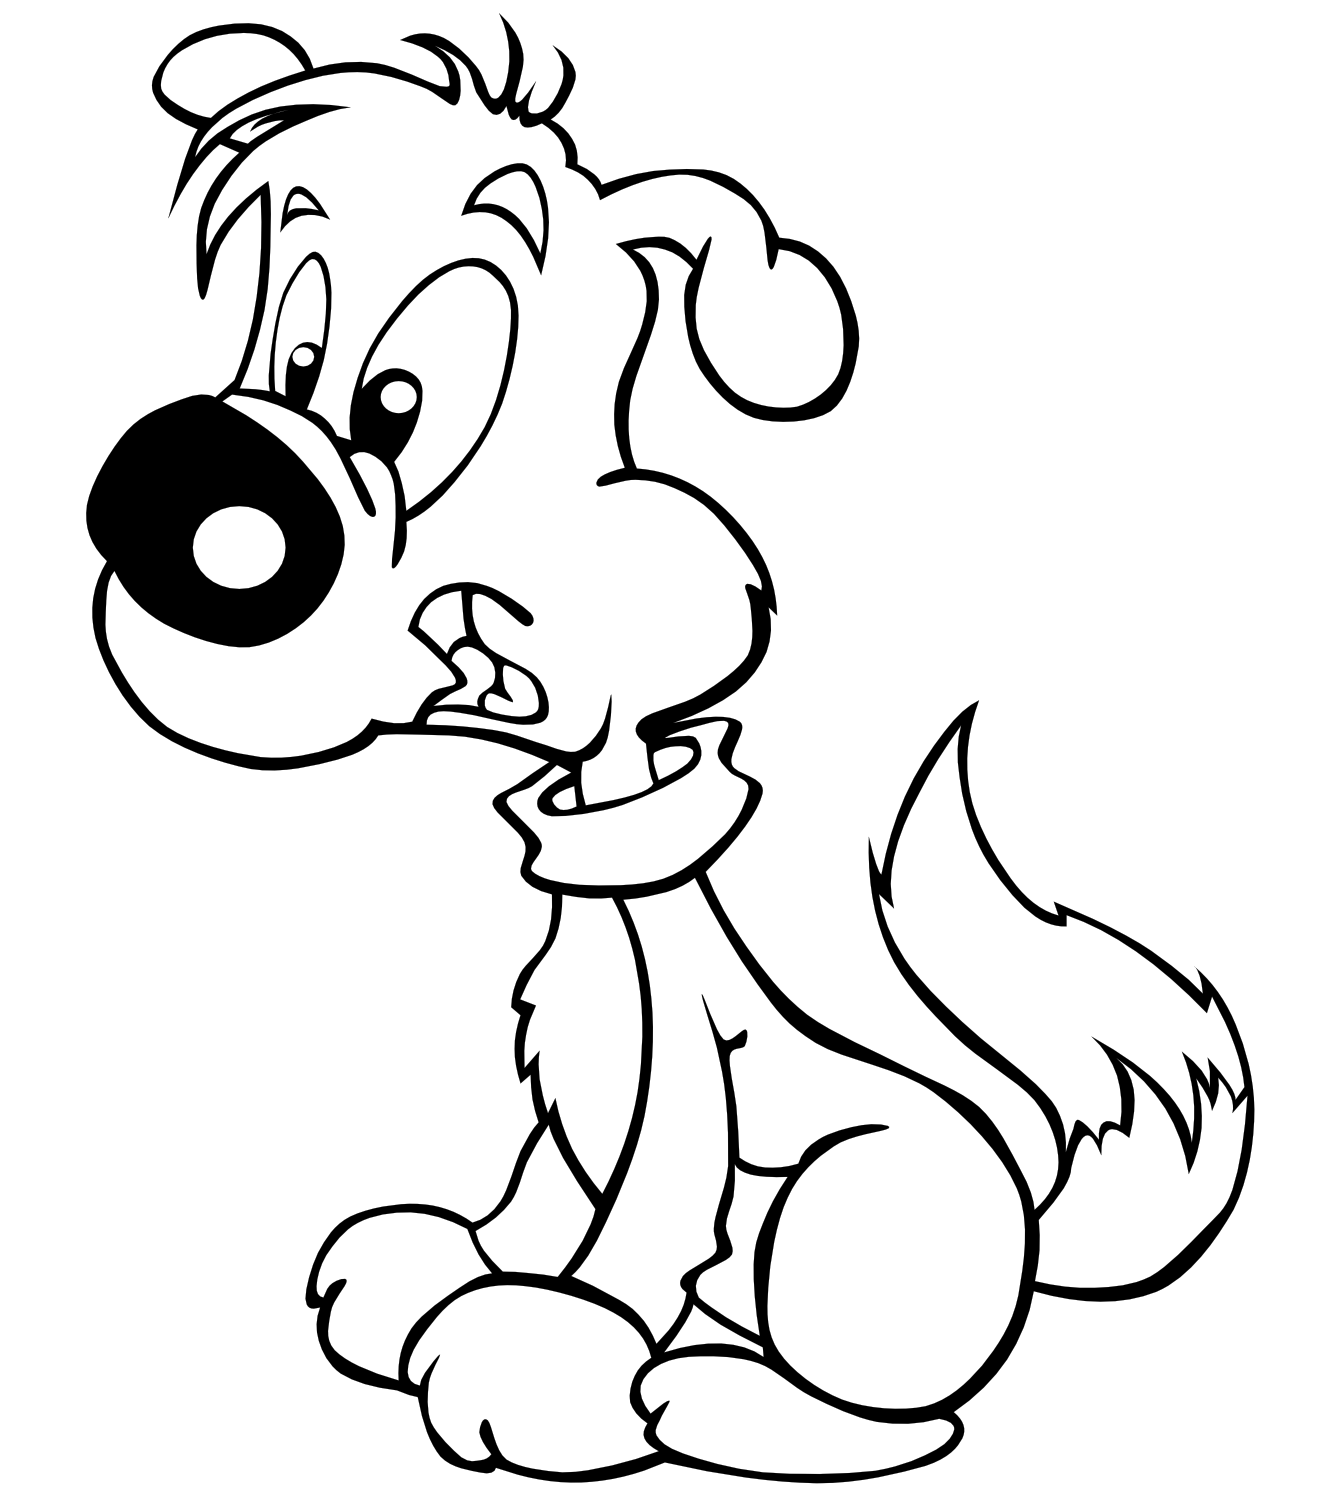 Puppies Clipart Black And White - ClipArt Best